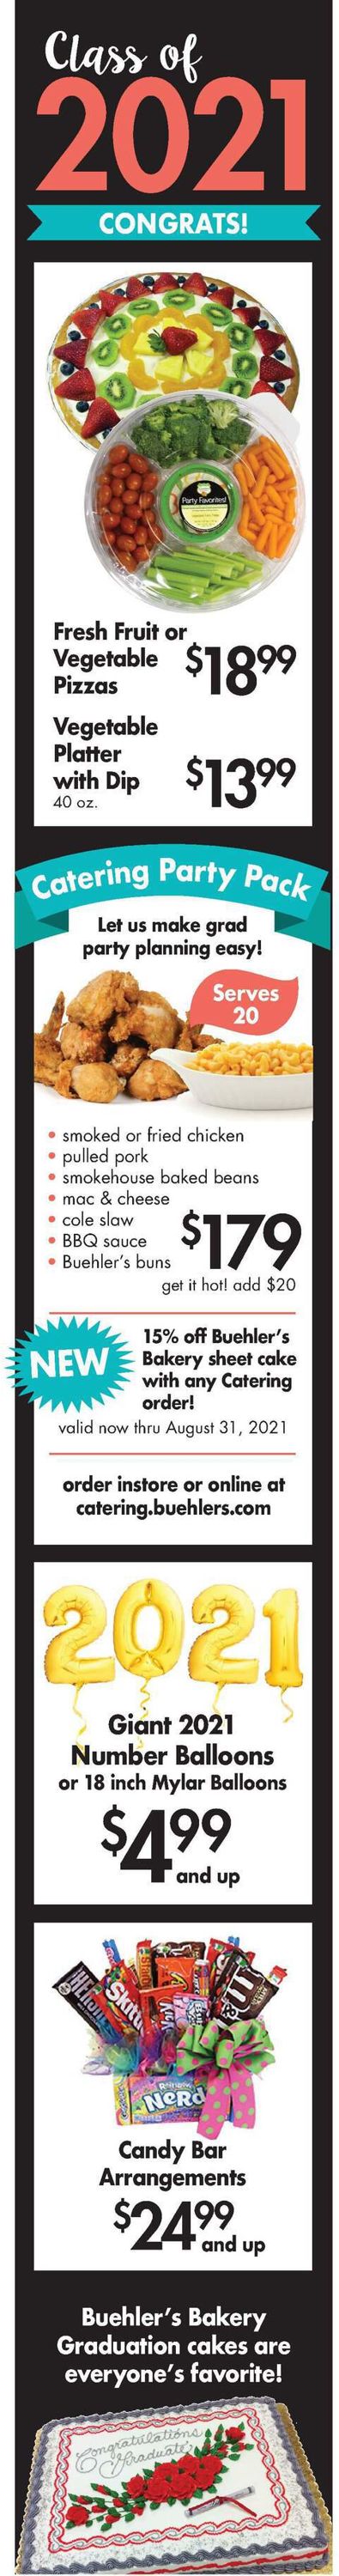 Buehler's Fresh Foods Ad from 05/19/2021